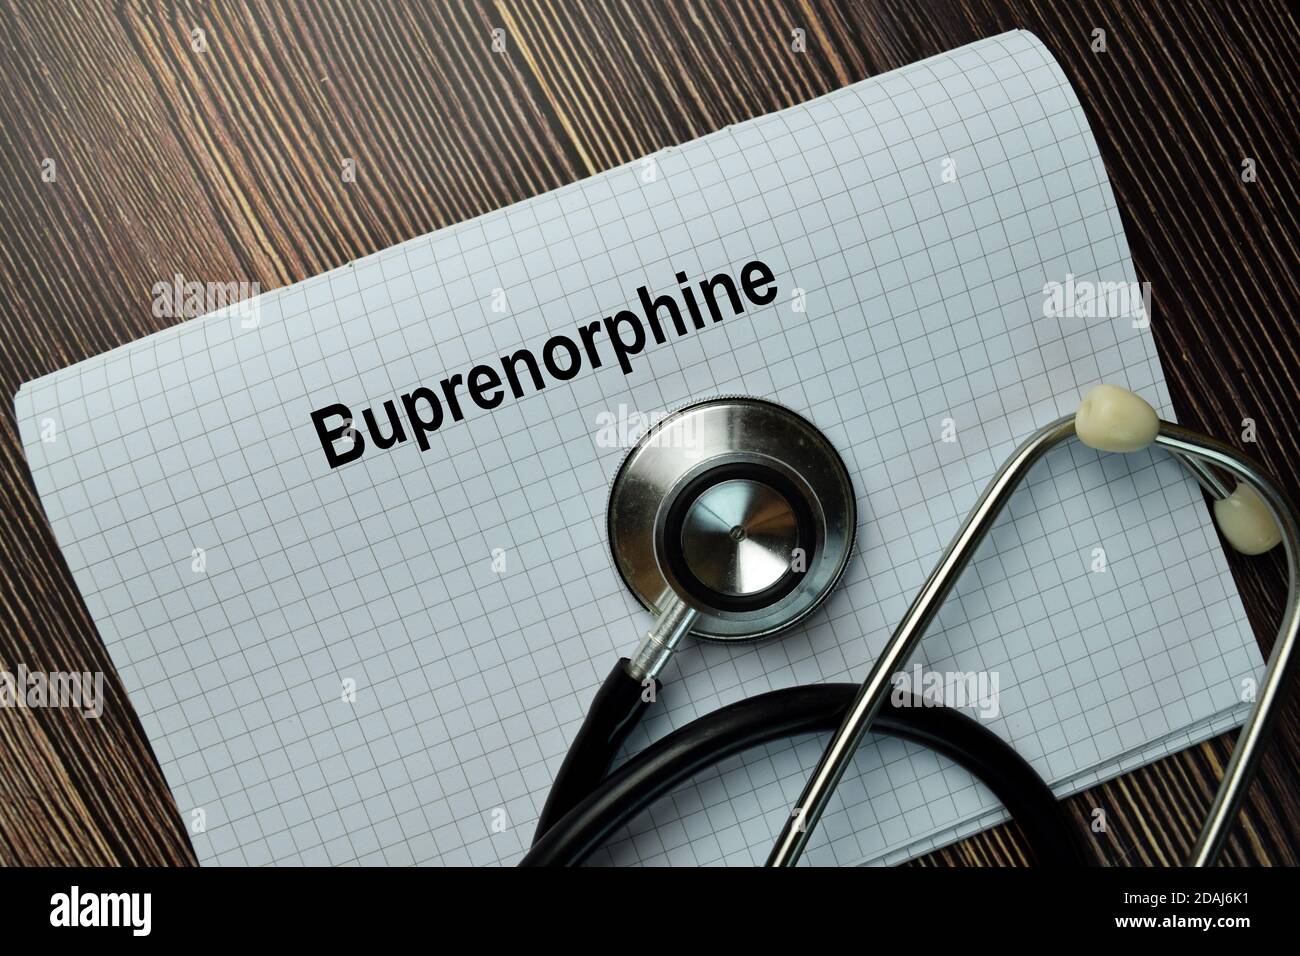 Buprenorphine write on a book and keyword isolated on Office Desk